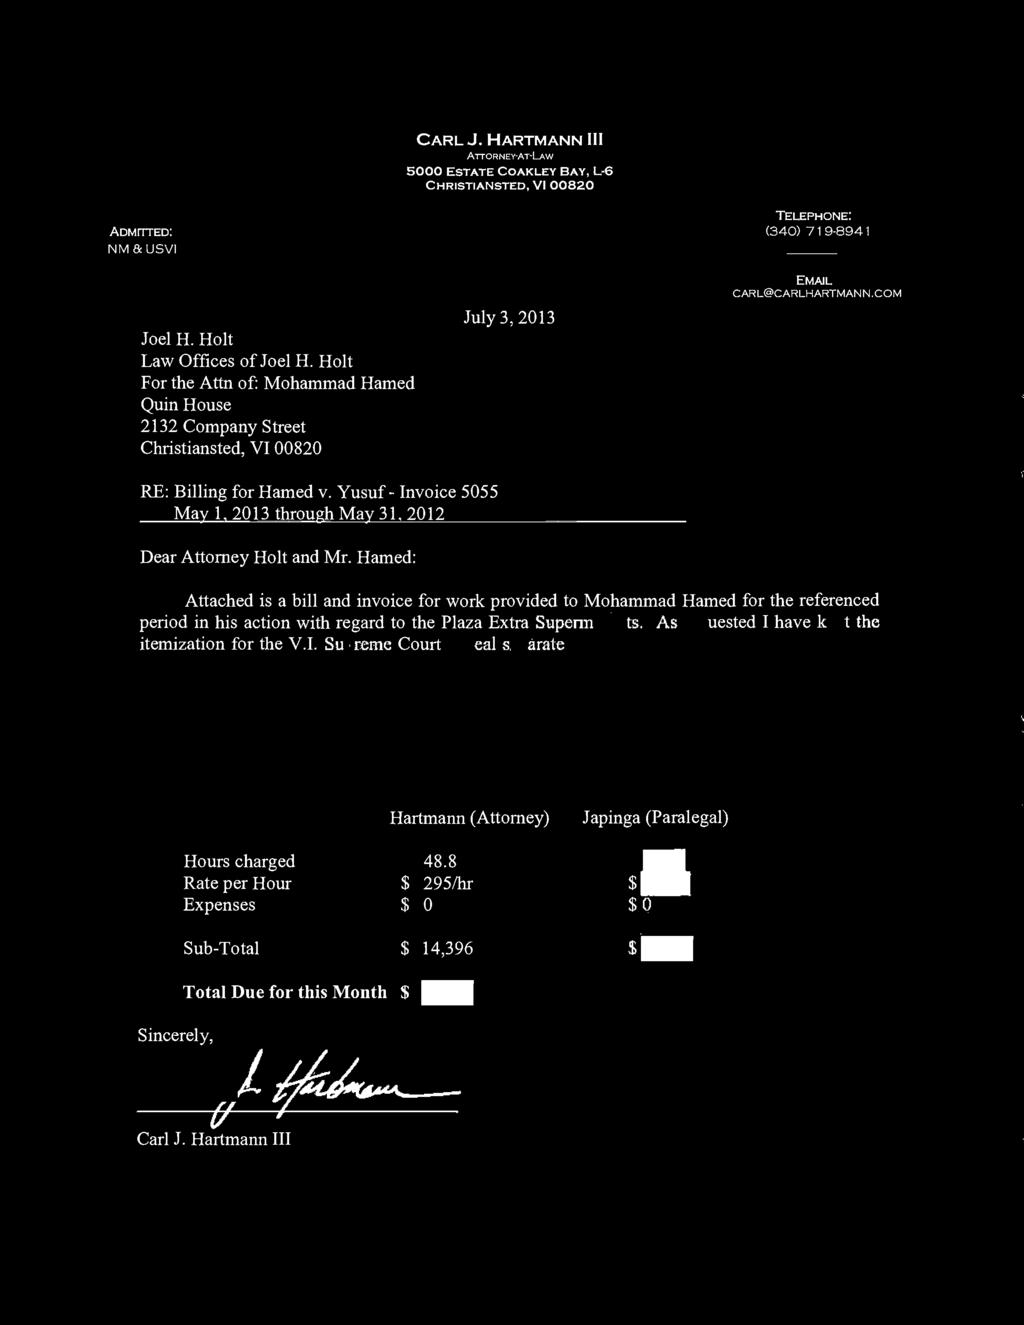 Yusuf - Invoice 5055 May 1, 2013 through May 31, 2012 Dear Attorney Holt and Mr.